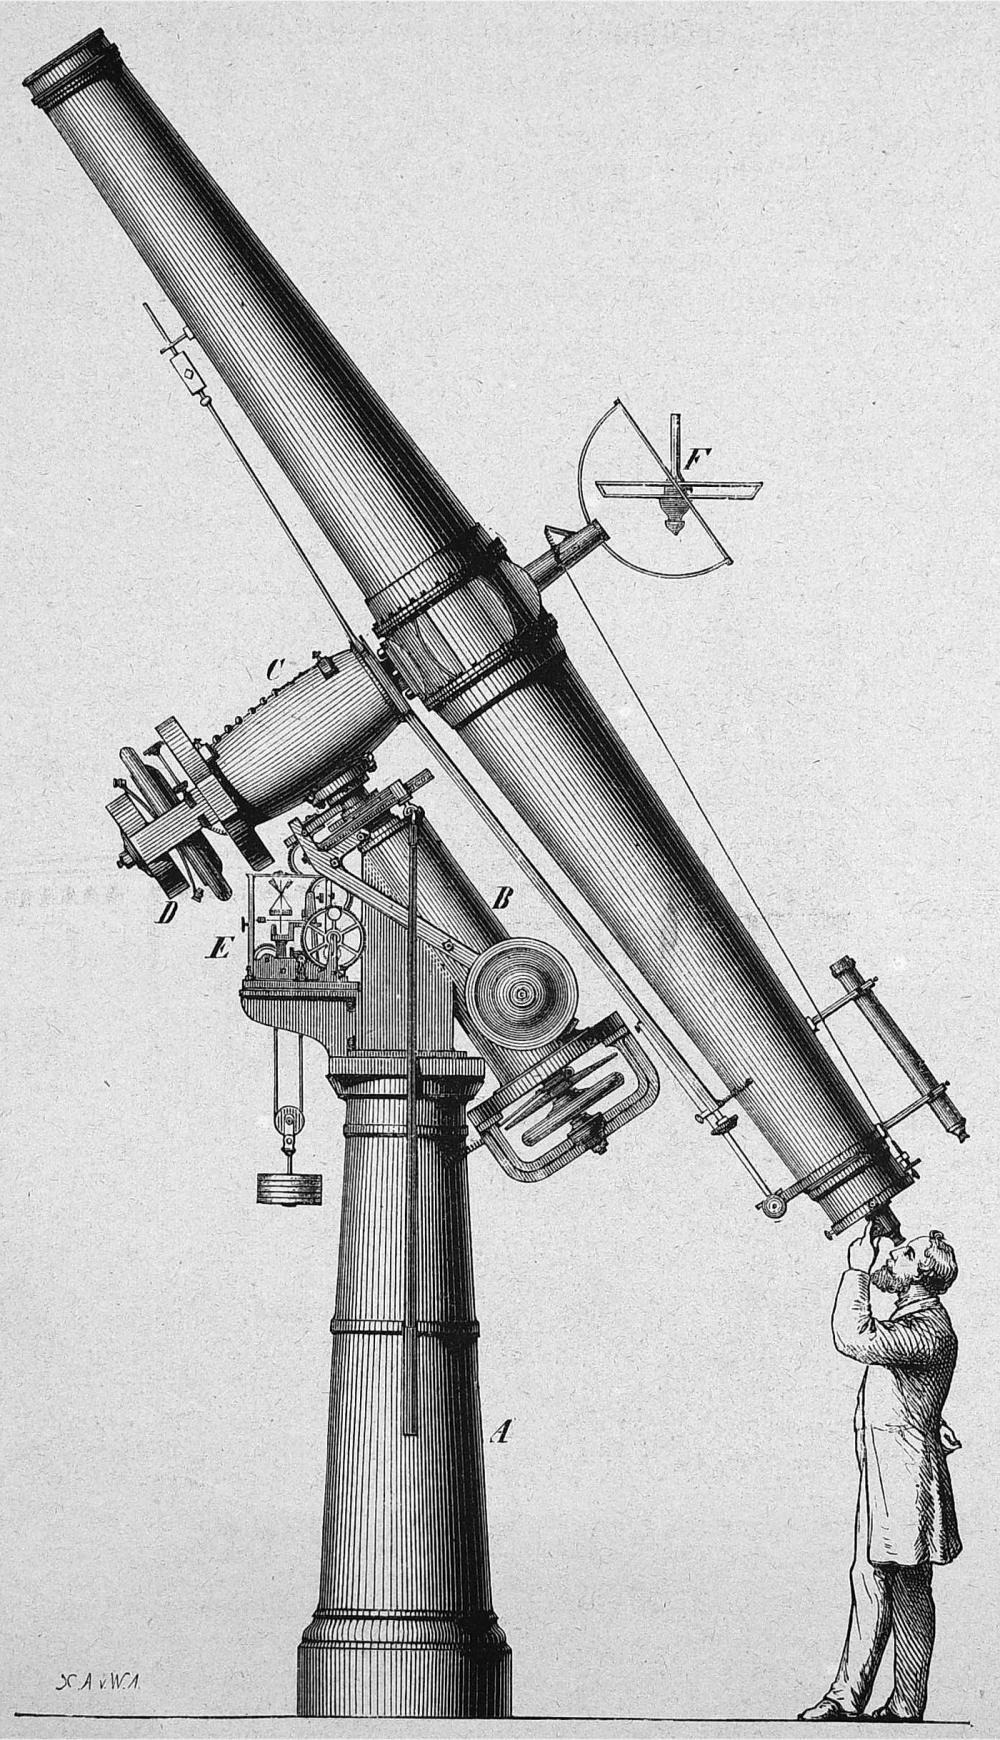 Large Bothkamp 29-cm-Refractor, made by Schrö